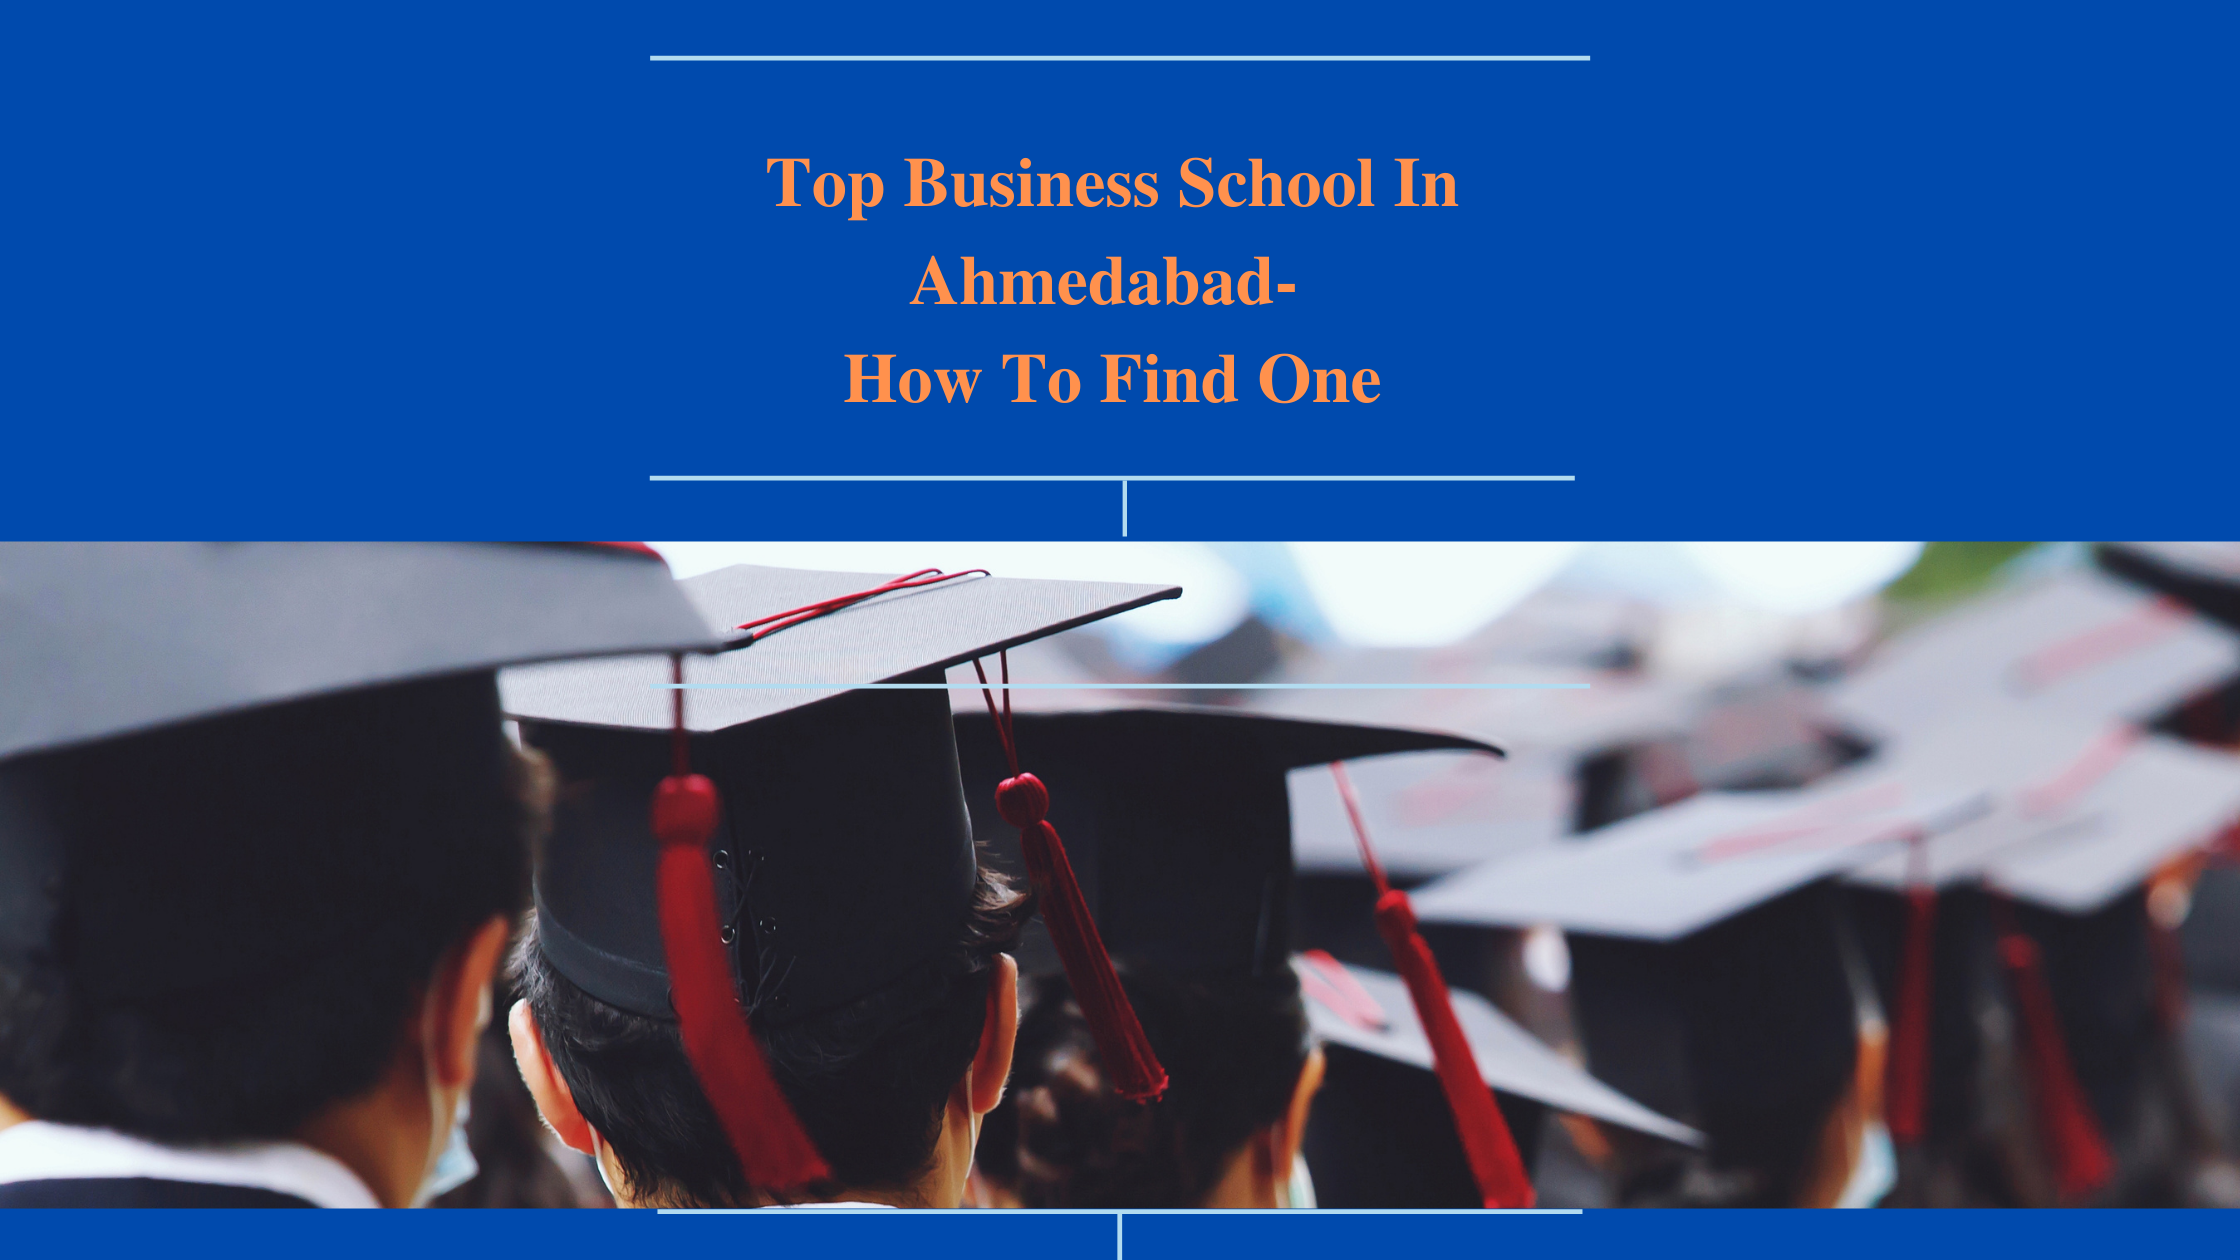 Top Business School In Ahmedabad- How To Find One